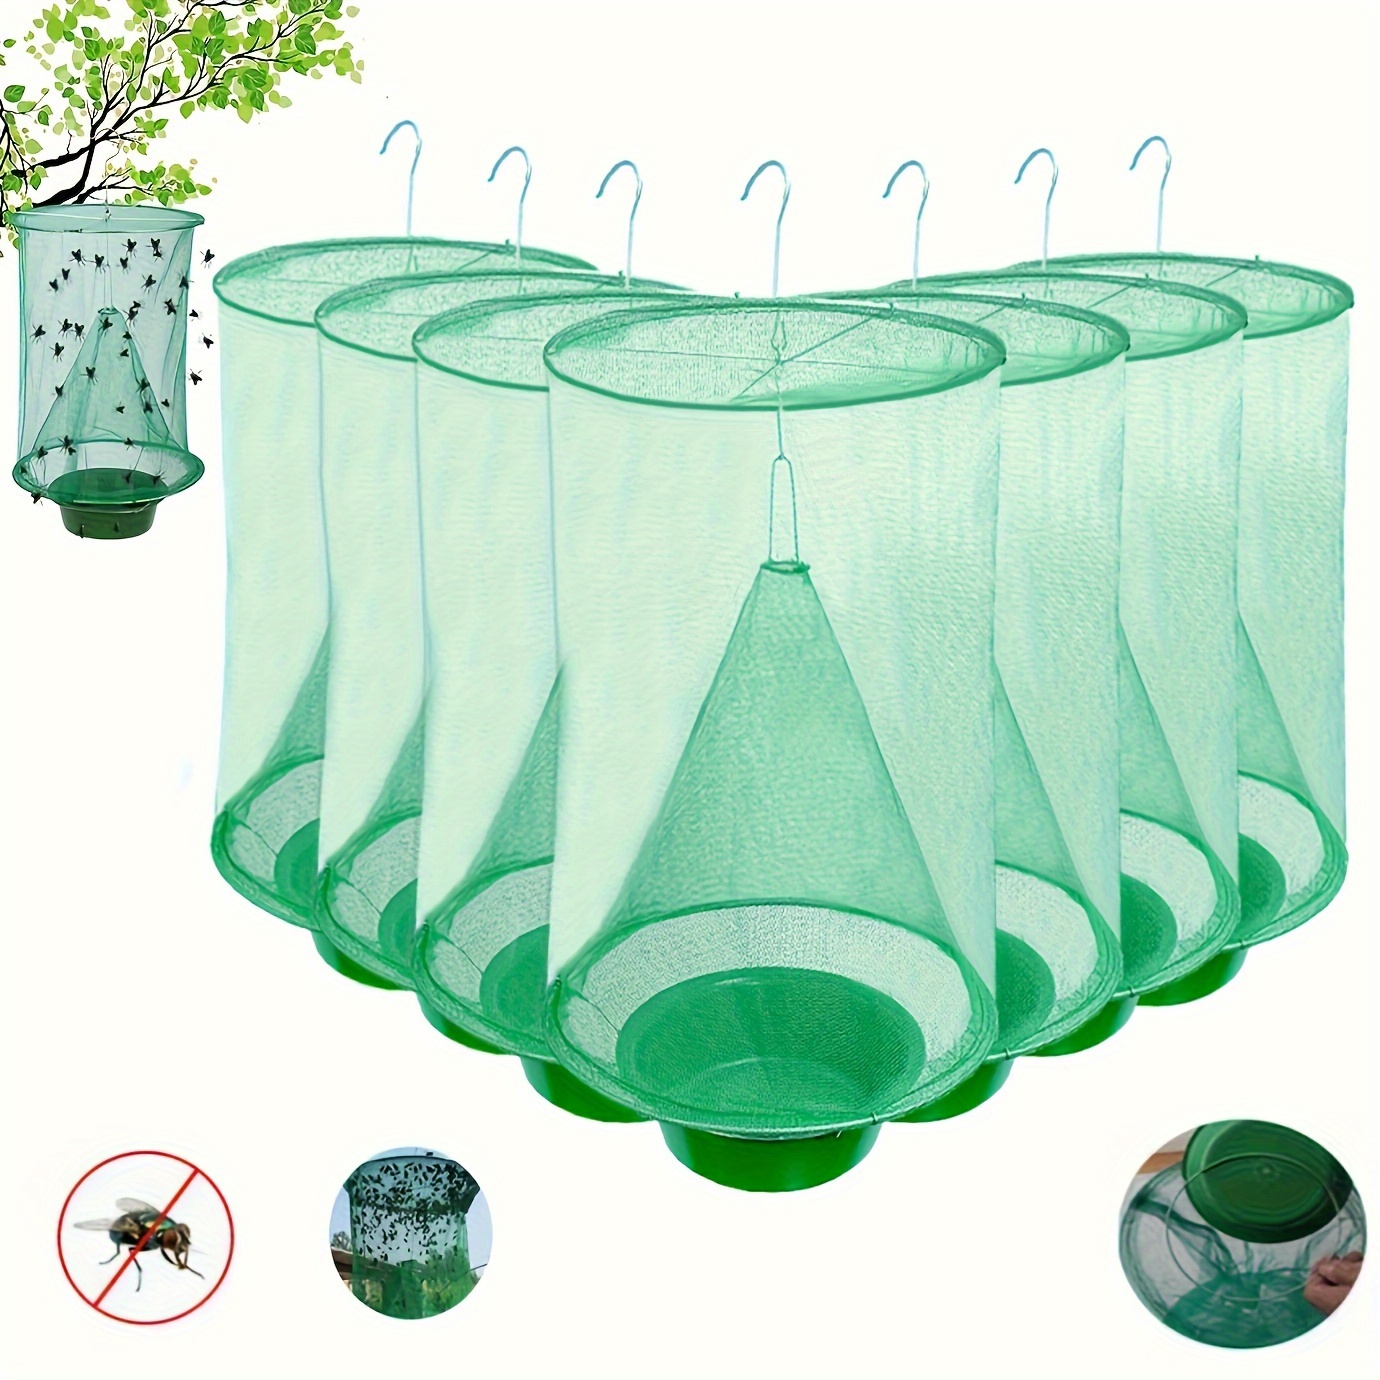 

2pcs/4pcs/6pcs, Ranch Fly Traps Outdoor, Hanging Stable Fly Trap, Horse Fly Traps, Reusable Fly Killer Cage, Fly Catcher Bag With Fly Bait, Fly Repellent For Outdoor And Indoor